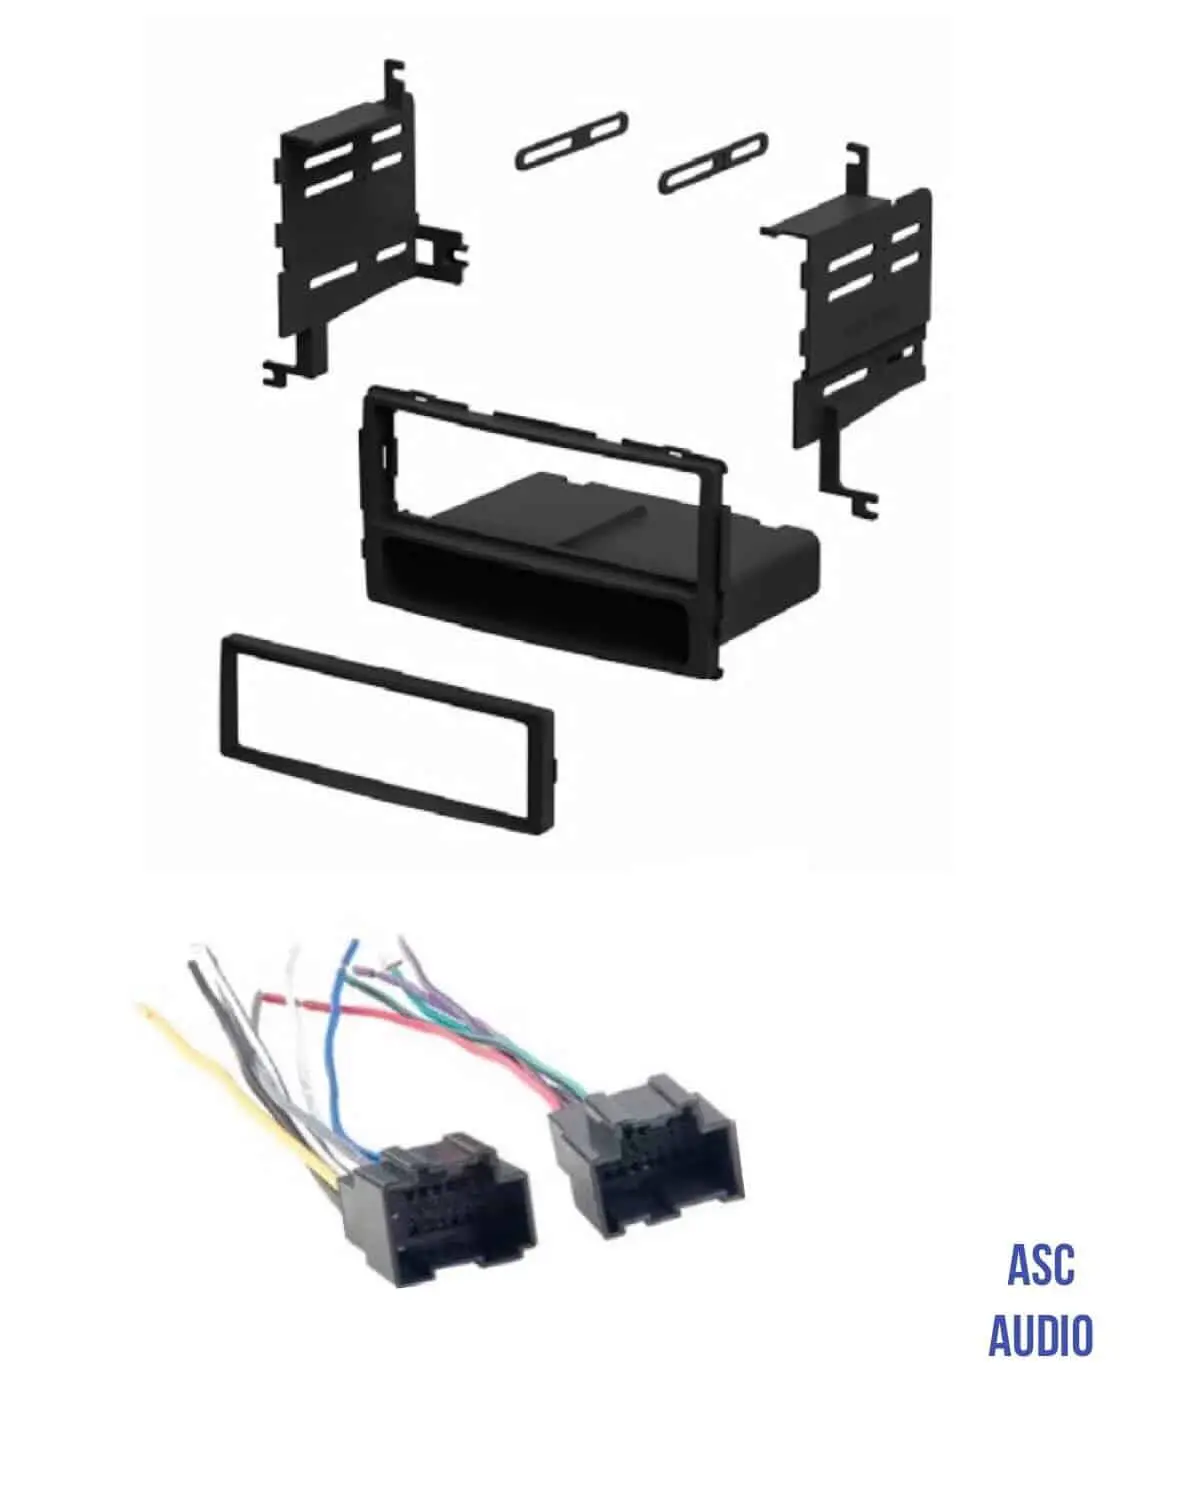 Car Stereo Radio Install Dash Kit and Wire Harness for installing an ...